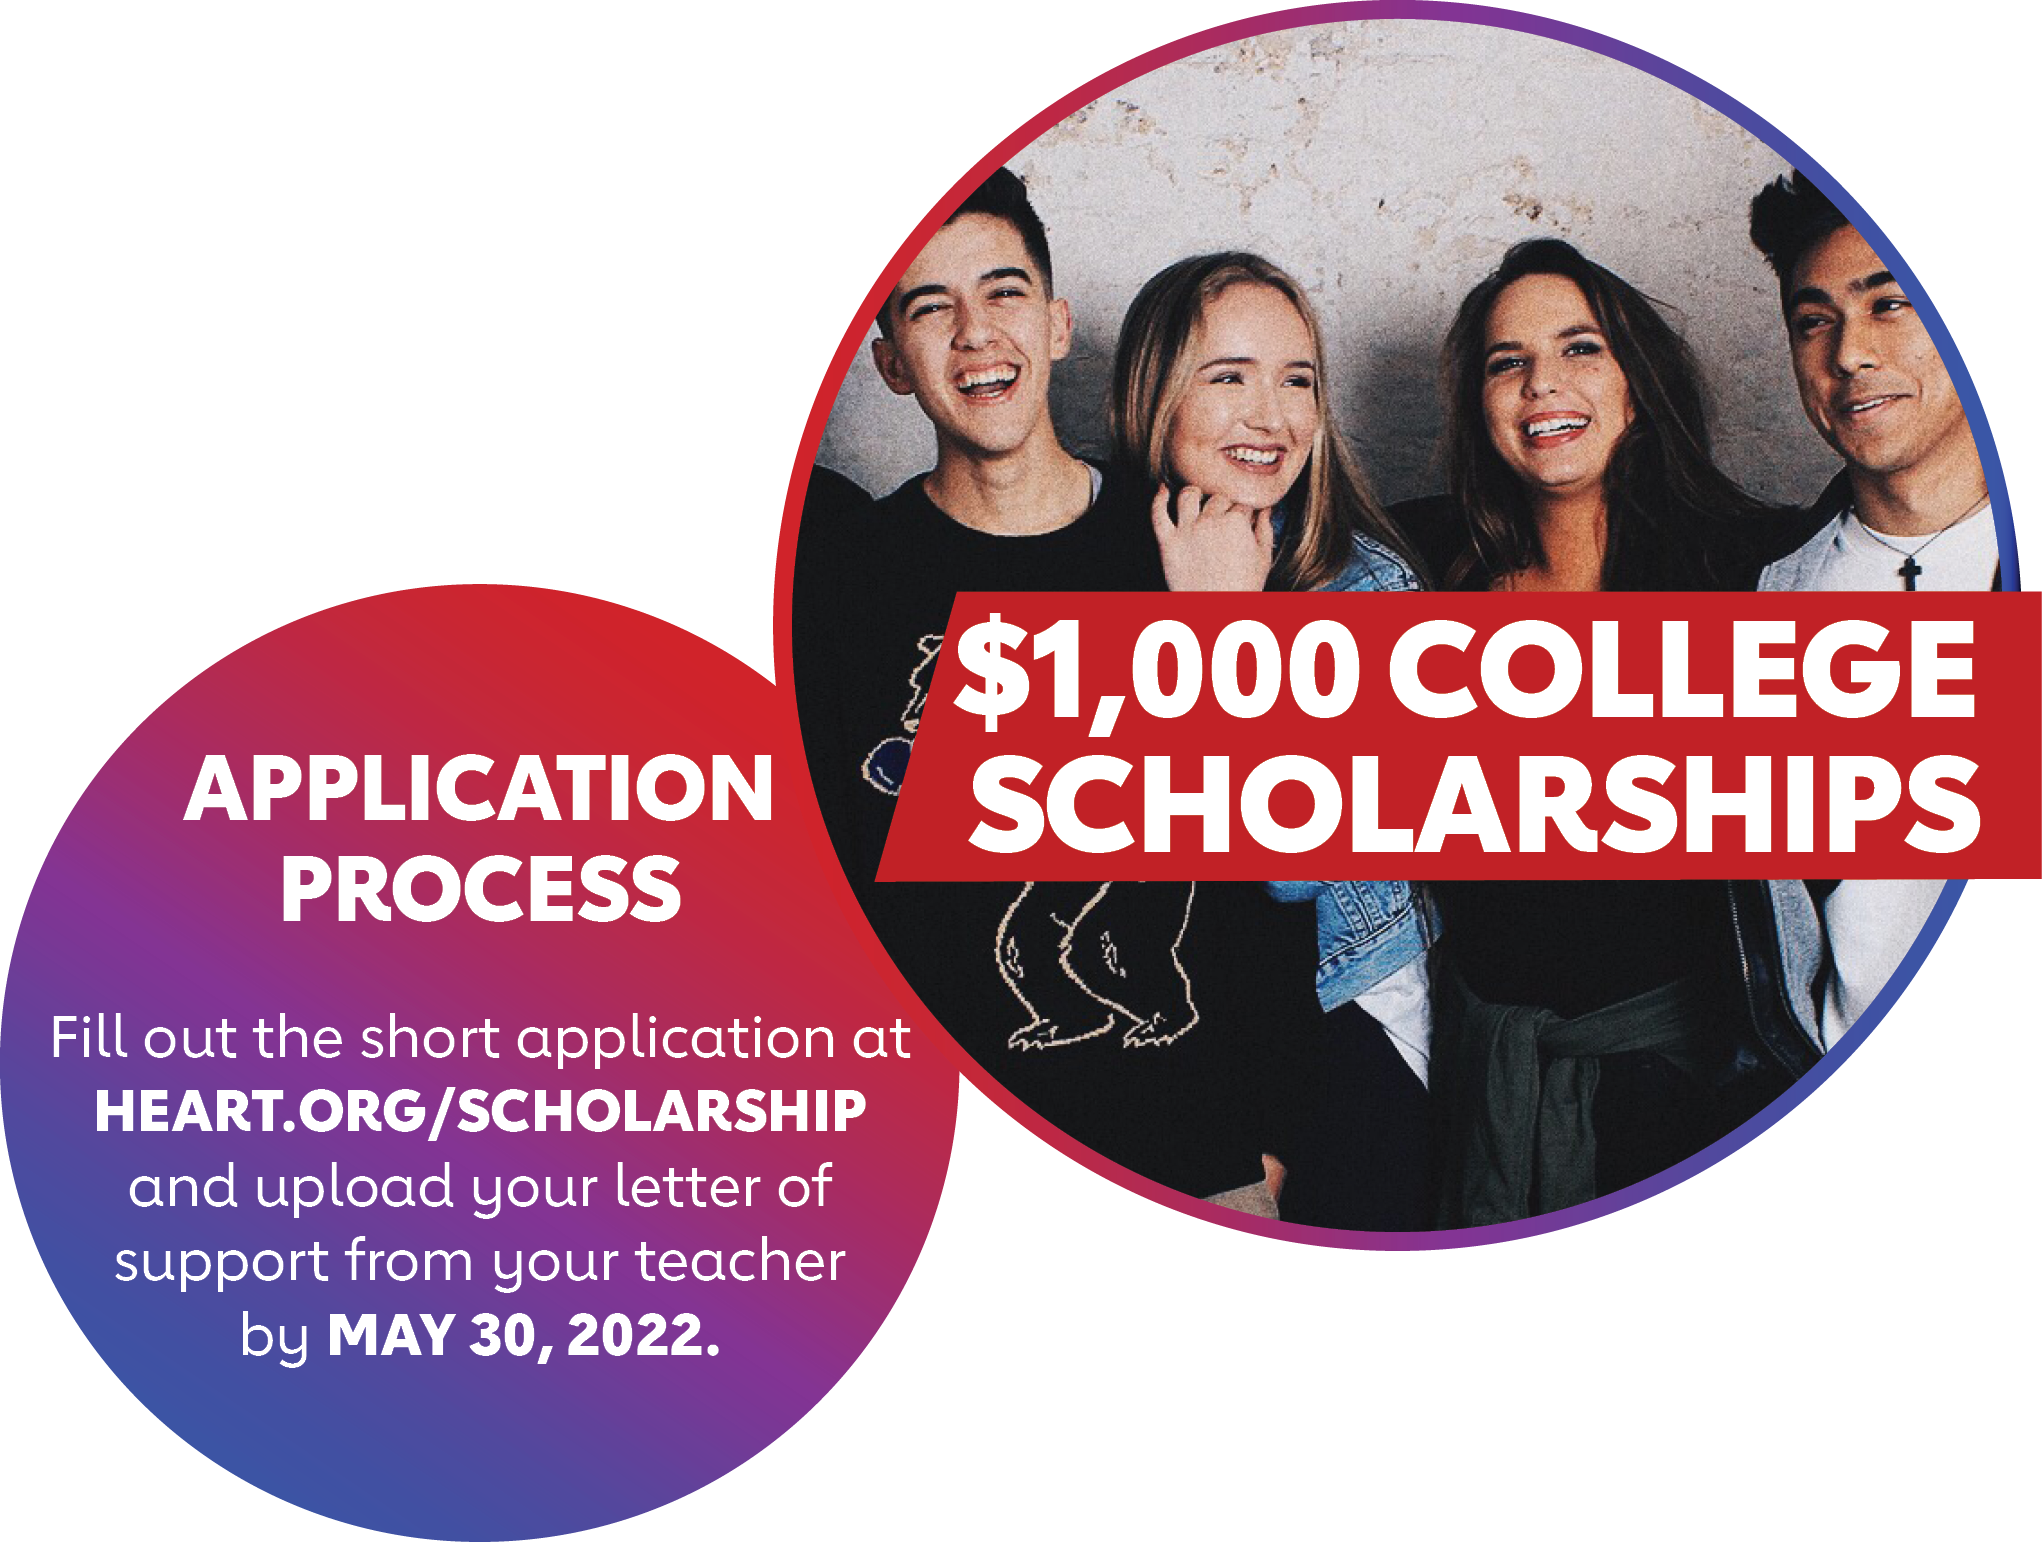 $1,000 COLLEGE SCHOLARSHIPS
APPLICATION PROCESS
Fill out the short application at
HEART.ORG/SCHOLARSHIP
and upload your letter of
support from your teacher by May 31, 2022.